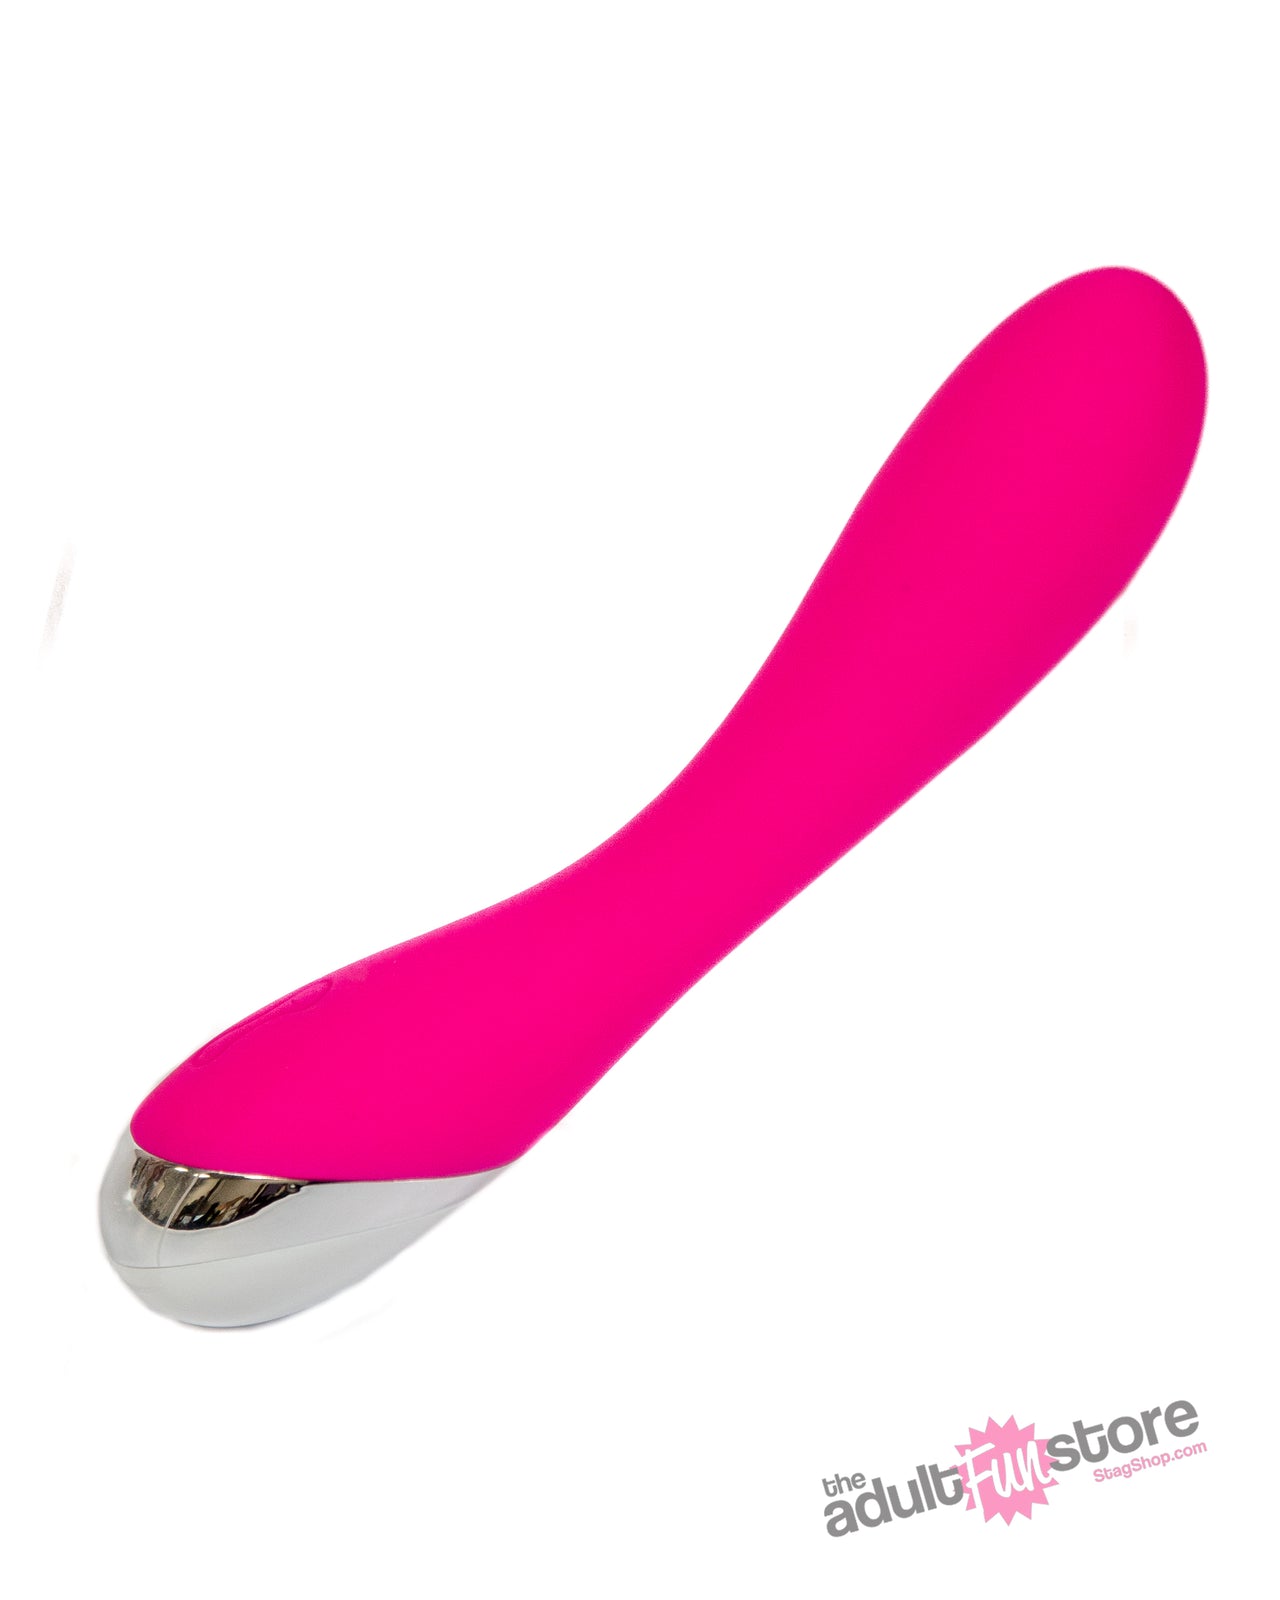 Stag Shop - Candy G-Spot Rechargeable Vibrator - Pink - Stag Shop